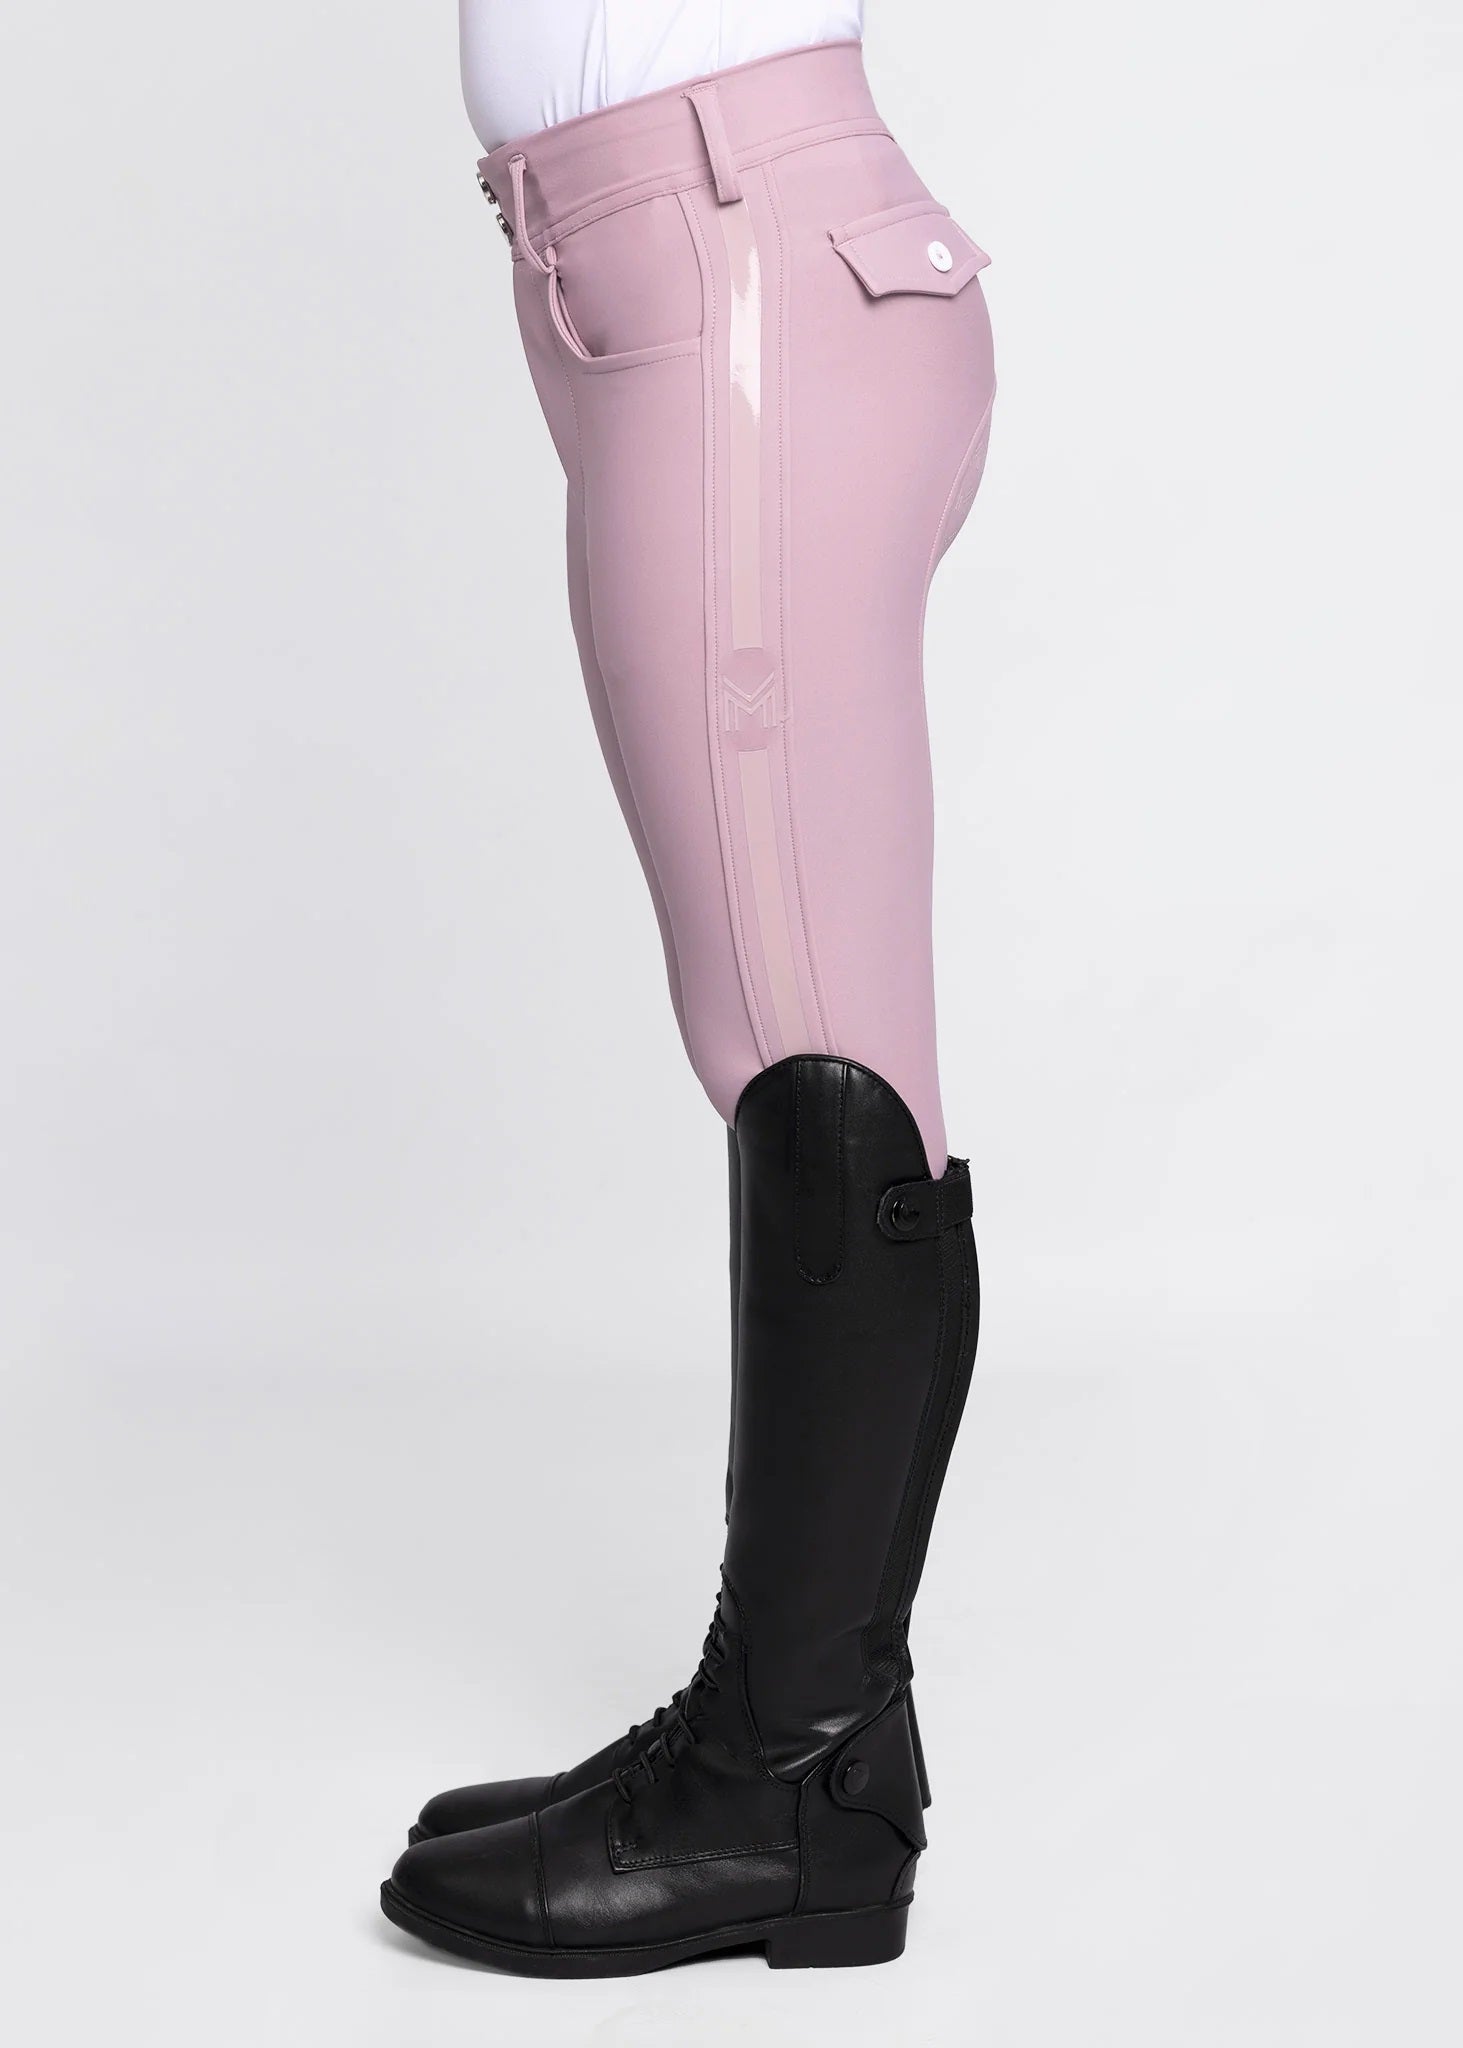 Young Riders - Reflection Breeches - Mauve